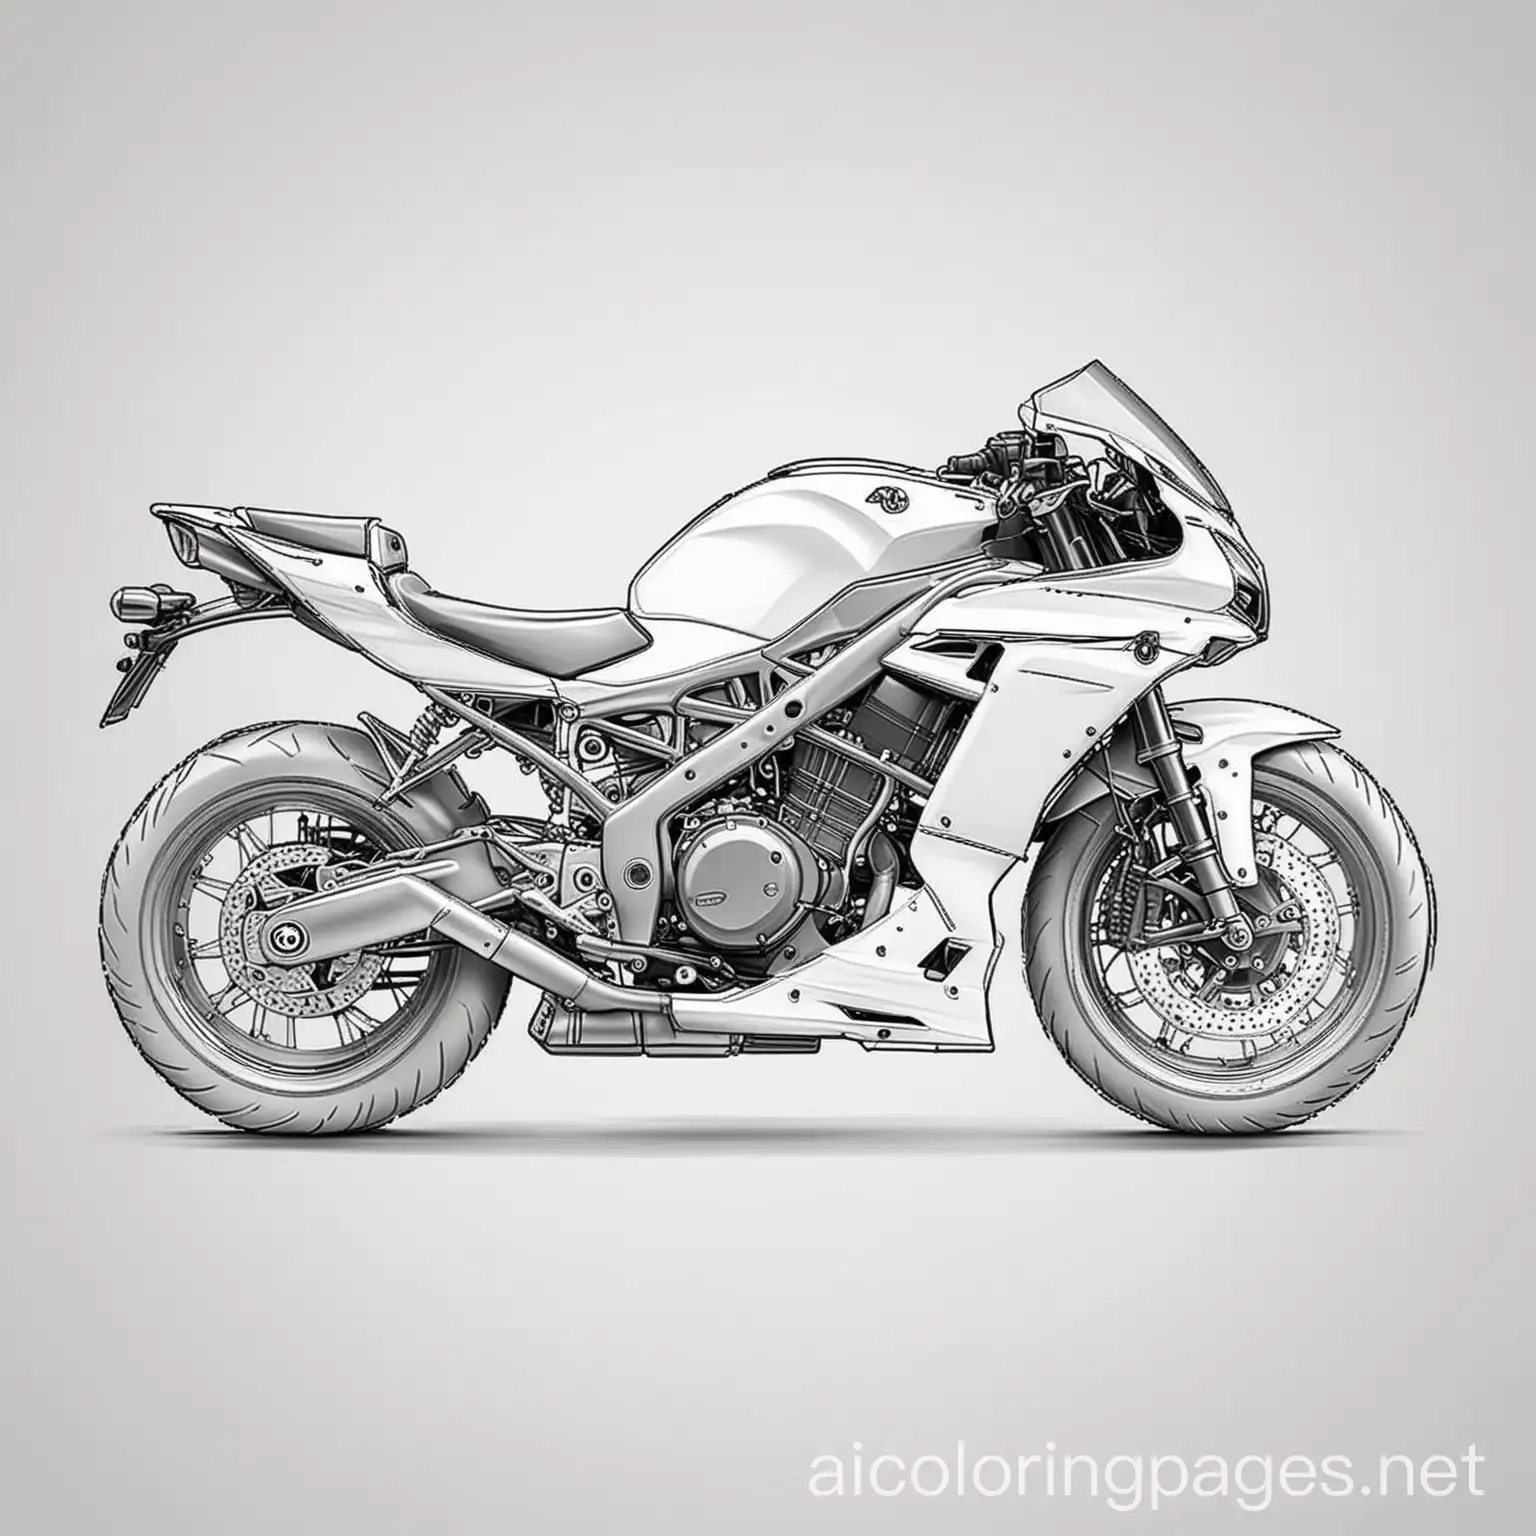 cool motorcycle 
, Coloring Page, black and white, line art, white background, Simplicity, Ample White Space. The background of the coloring page is plain white to make it easy for young children to color within the lines. The outlines of all the subjects are easy to distinguish, making it simple for kids to color without too much difficulty